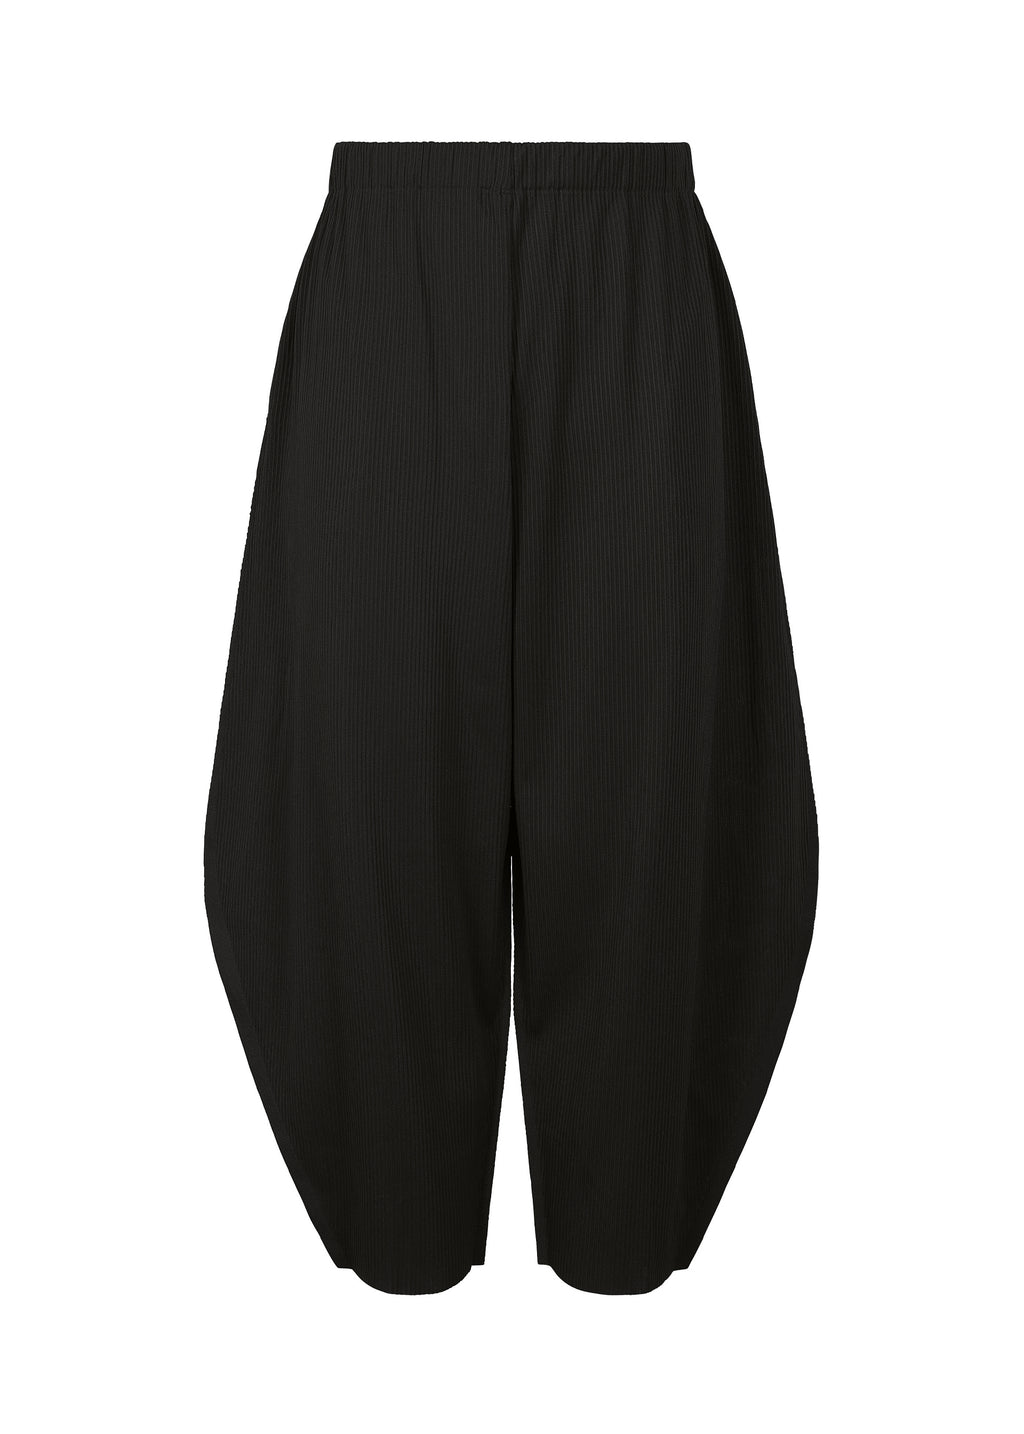 A-POC BOTTOMS Trousers Black | ISSEY MIYAKE ONLINE STORE 